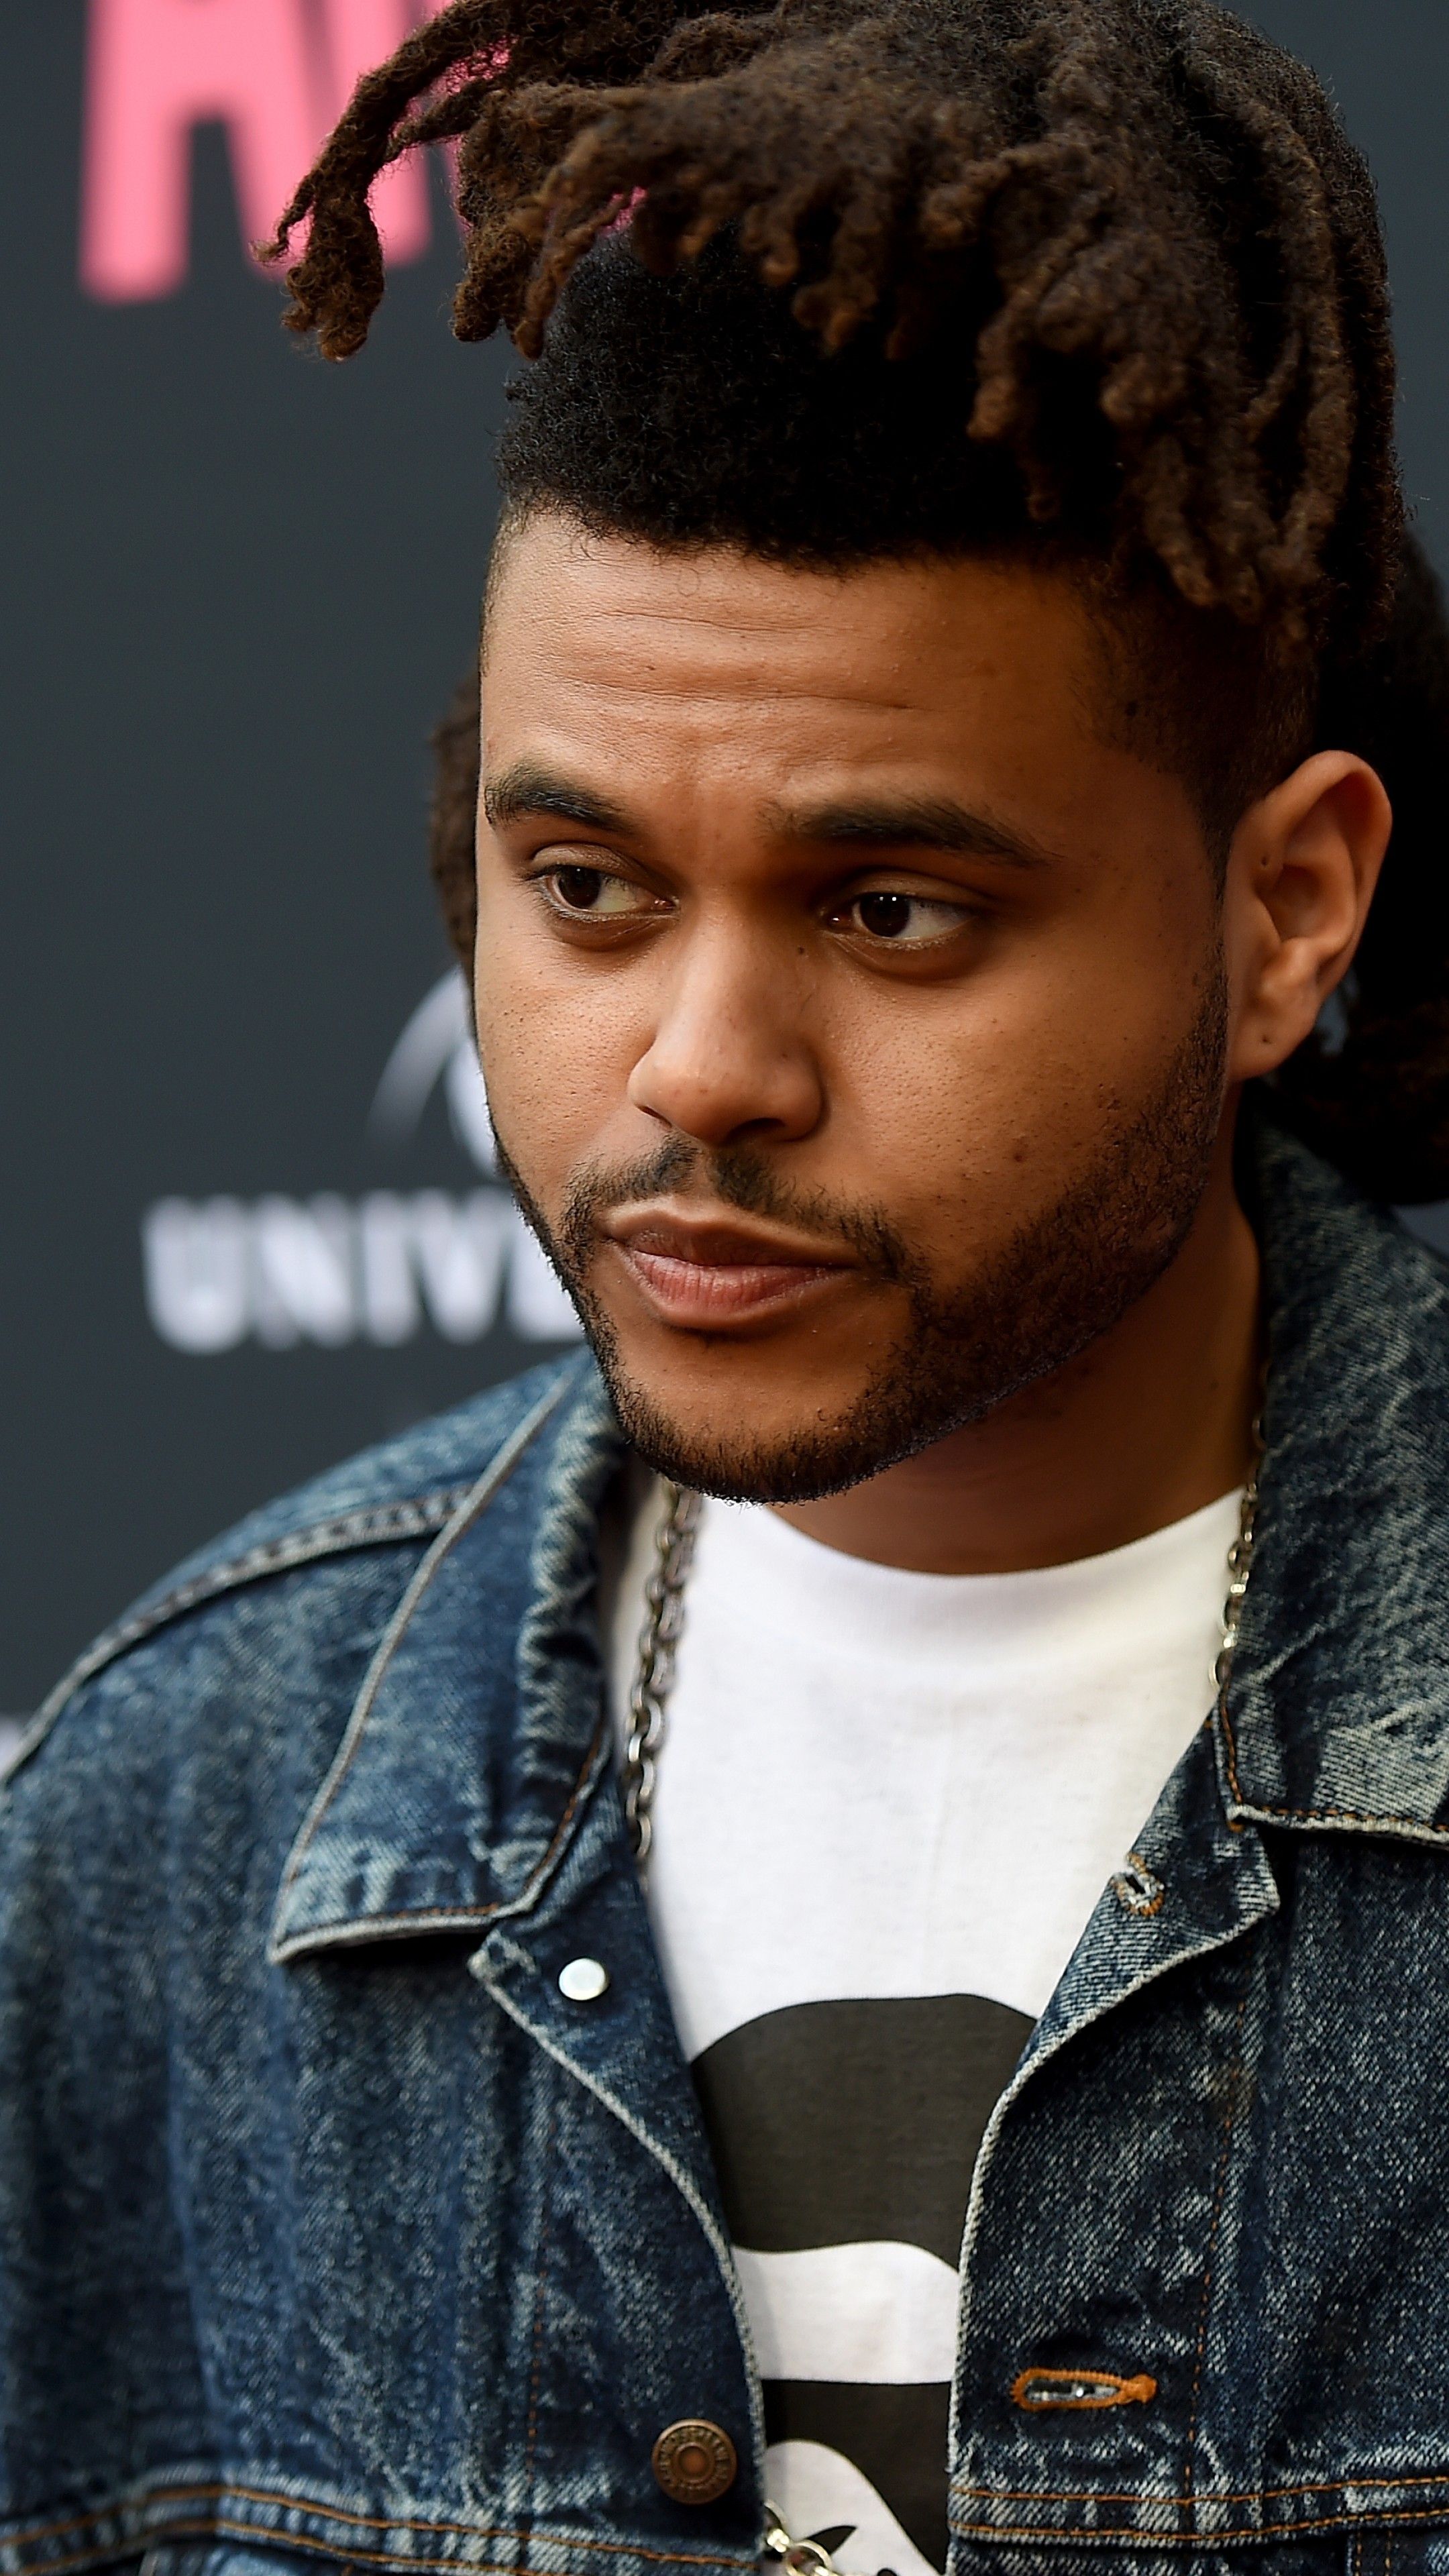 Wallpaper The Weeknd, Abel Tesfaye, Top music artist and bands, Celebrities